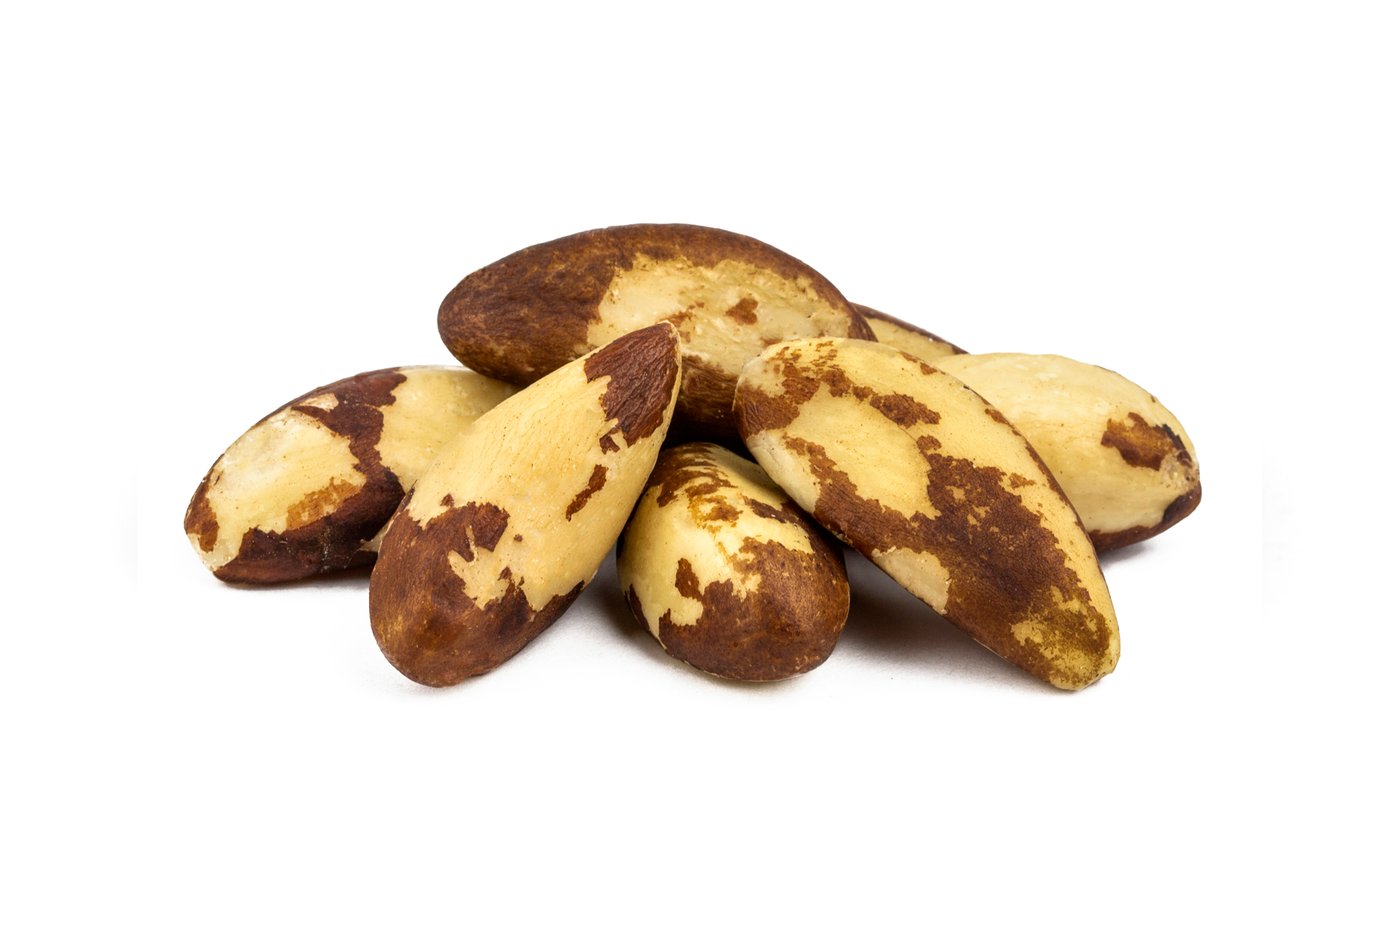 Roasted Brazil Nuts (Unsalted) image zoom